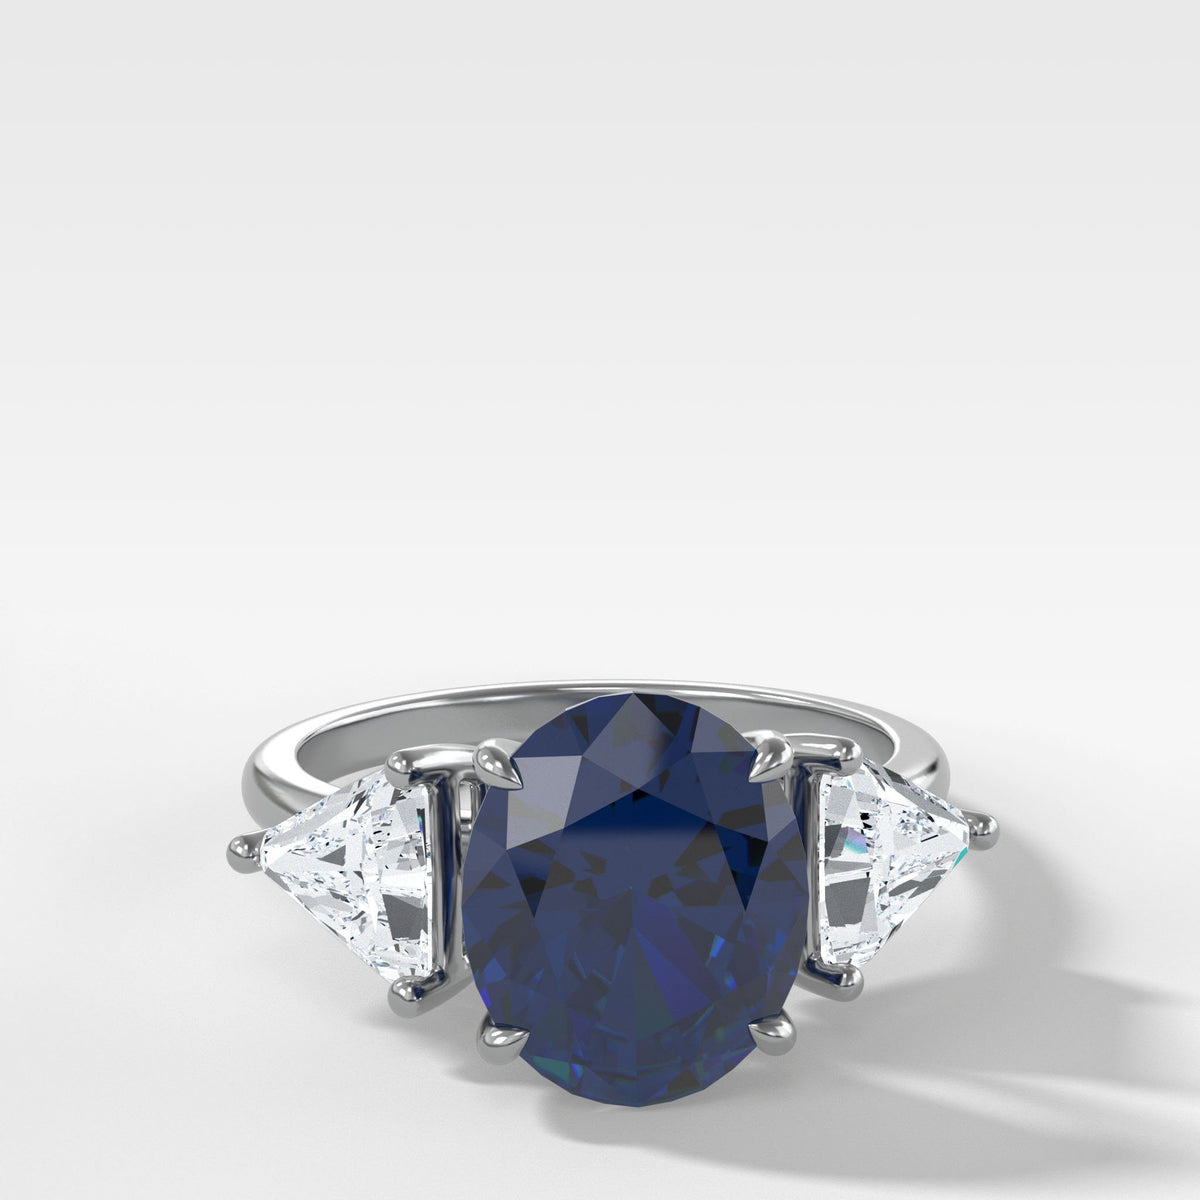 Oval Cut Sapphire Three Stone Engagement Ring With Trilliant Cut Diamond Sides by Good Stone in White Gold